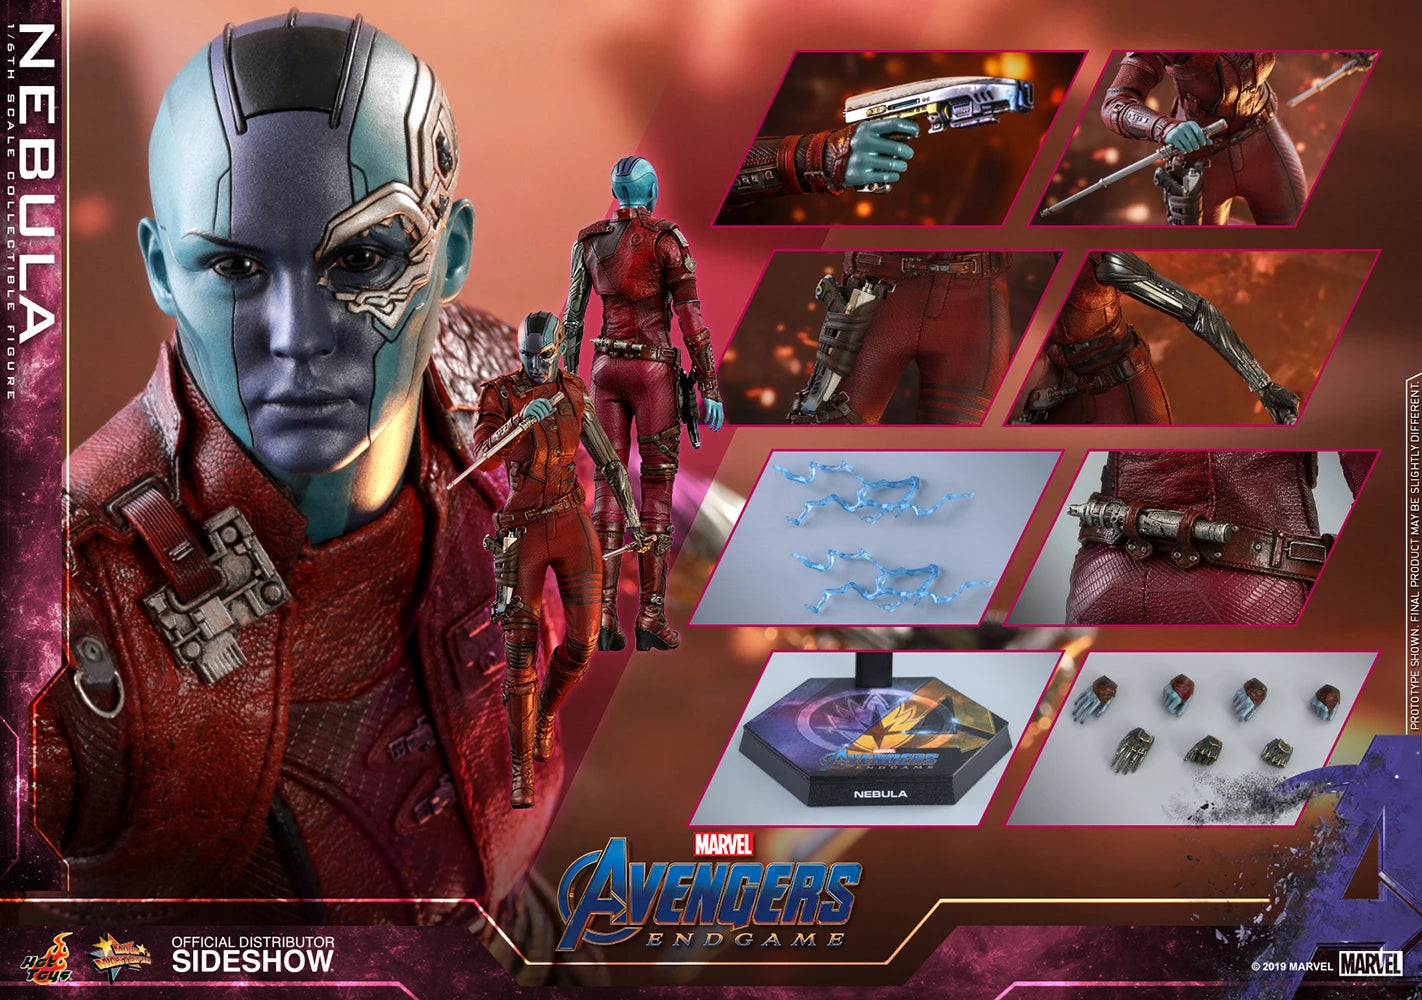 HOT TOYS MARVEL AVENGERS ENDGAME NEBULA 1/6TH SCALE COLLECTIBLE FIGURE - MMS534 - Anotoys Collectibles